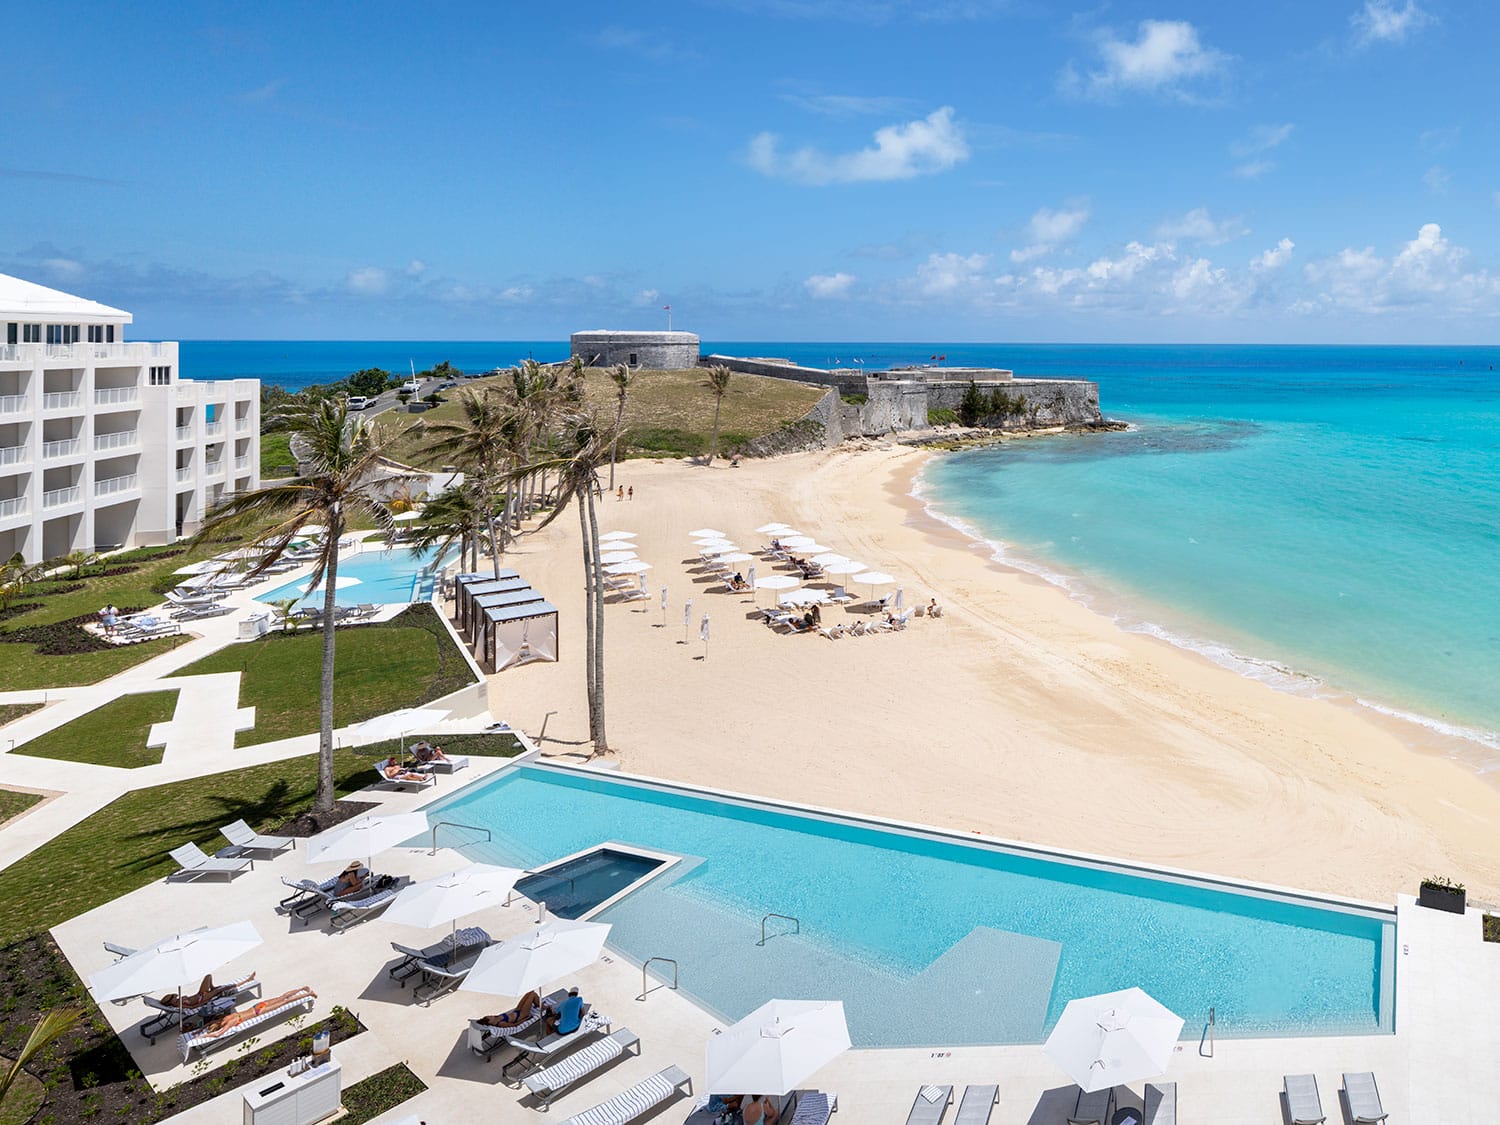 The pools and beach at The St. Regis Bermuda Resort with Fort St. Catherine in the distance.